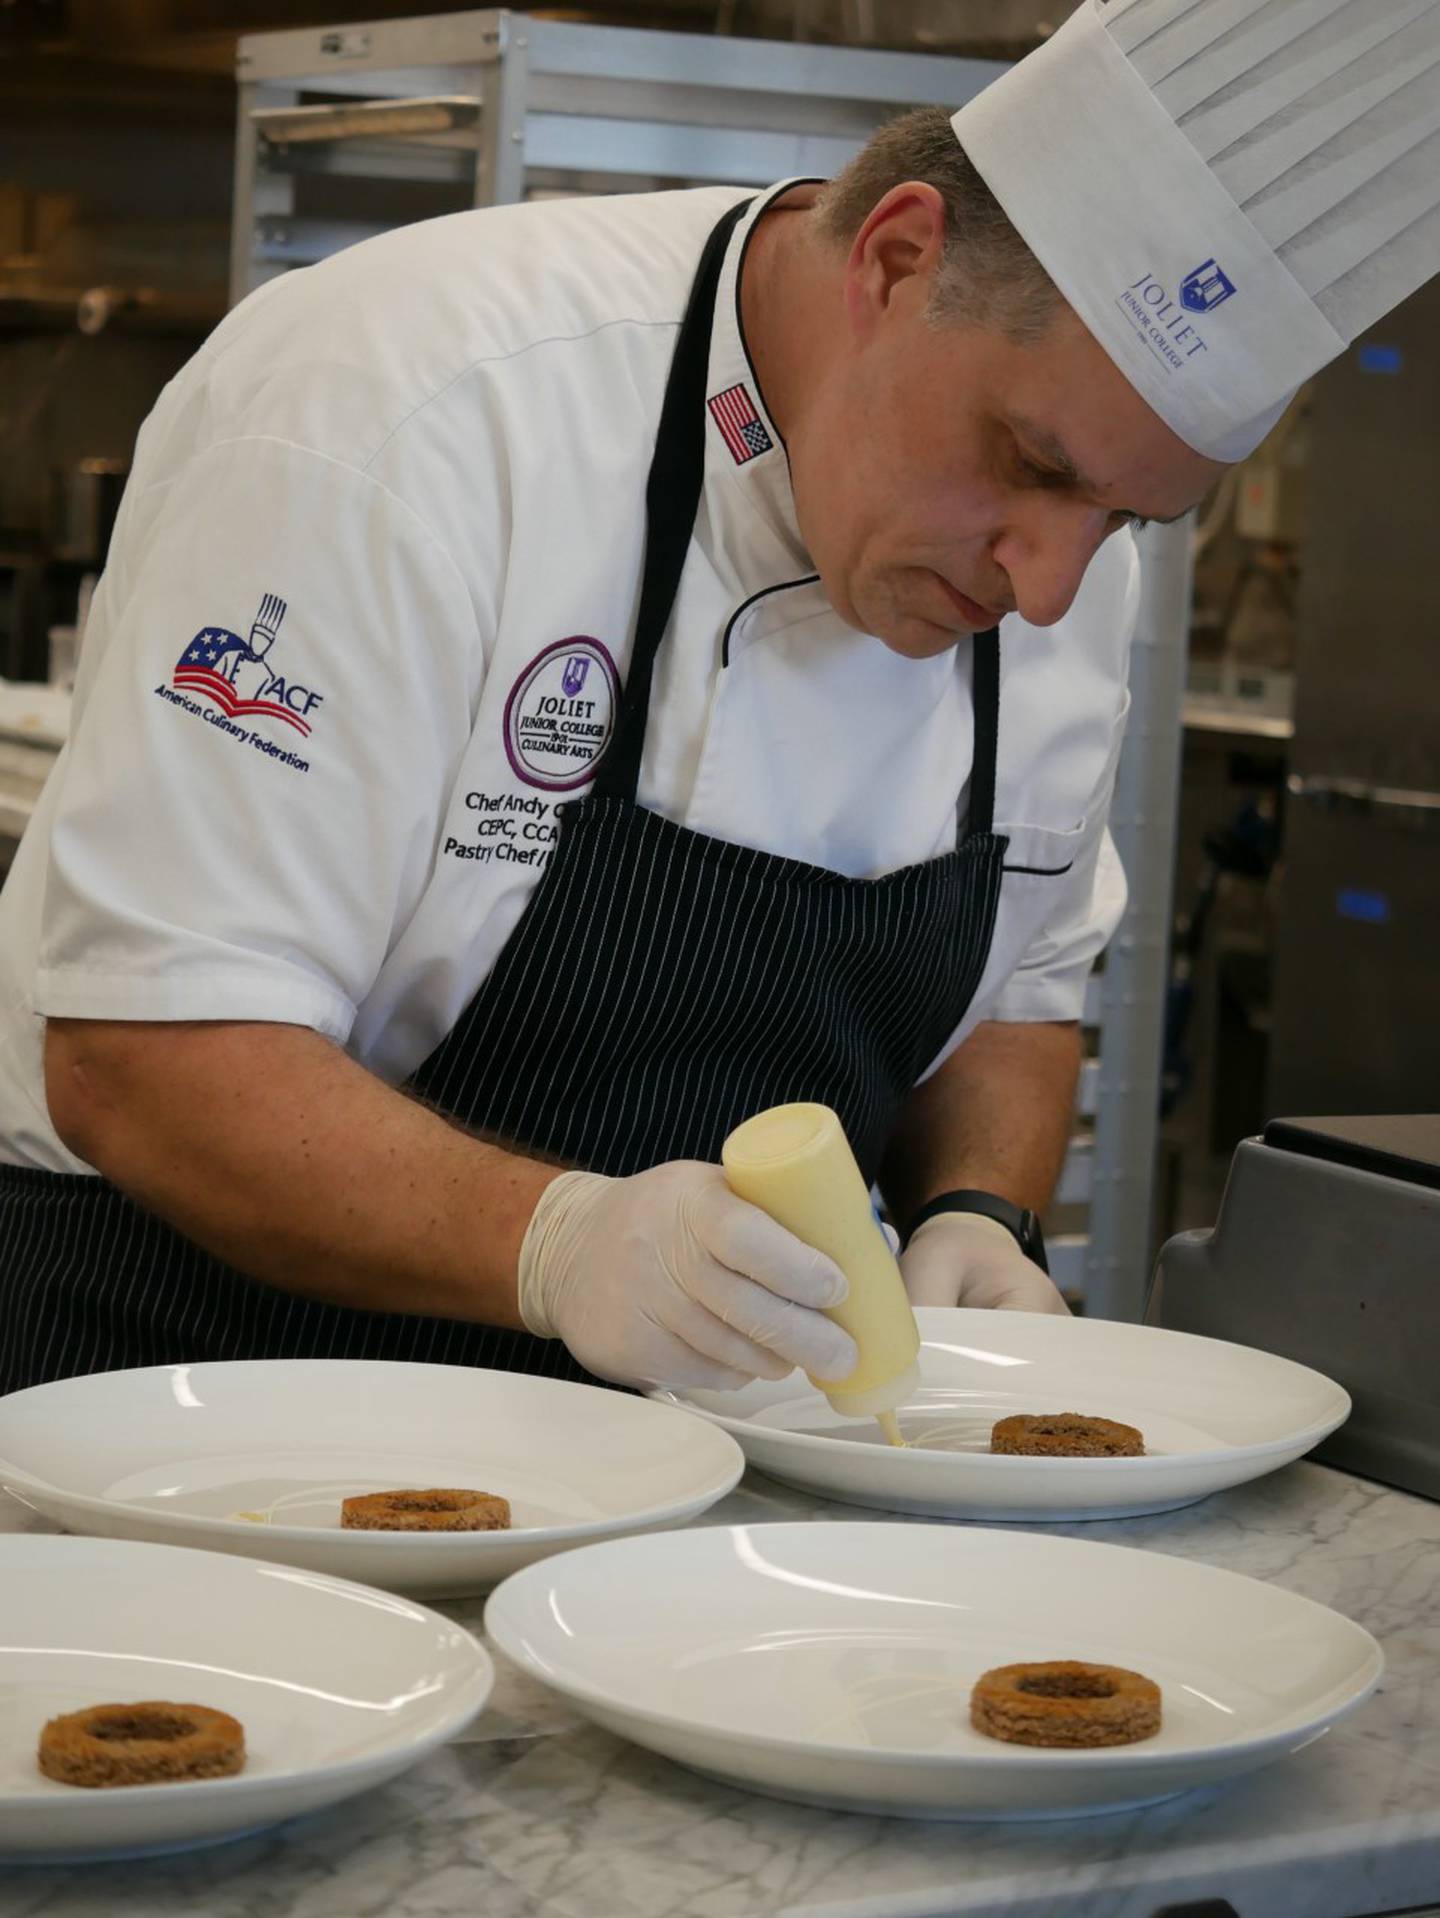 Joliet Junior College pastry chef Andy Chlebana is seen at the Culinary Institute at Virginia Western in January. Chlebana is taking the test for his certified master pastry chef just seven months after having brain surgery to treat his acromegaly, a rare endocrine disorder.